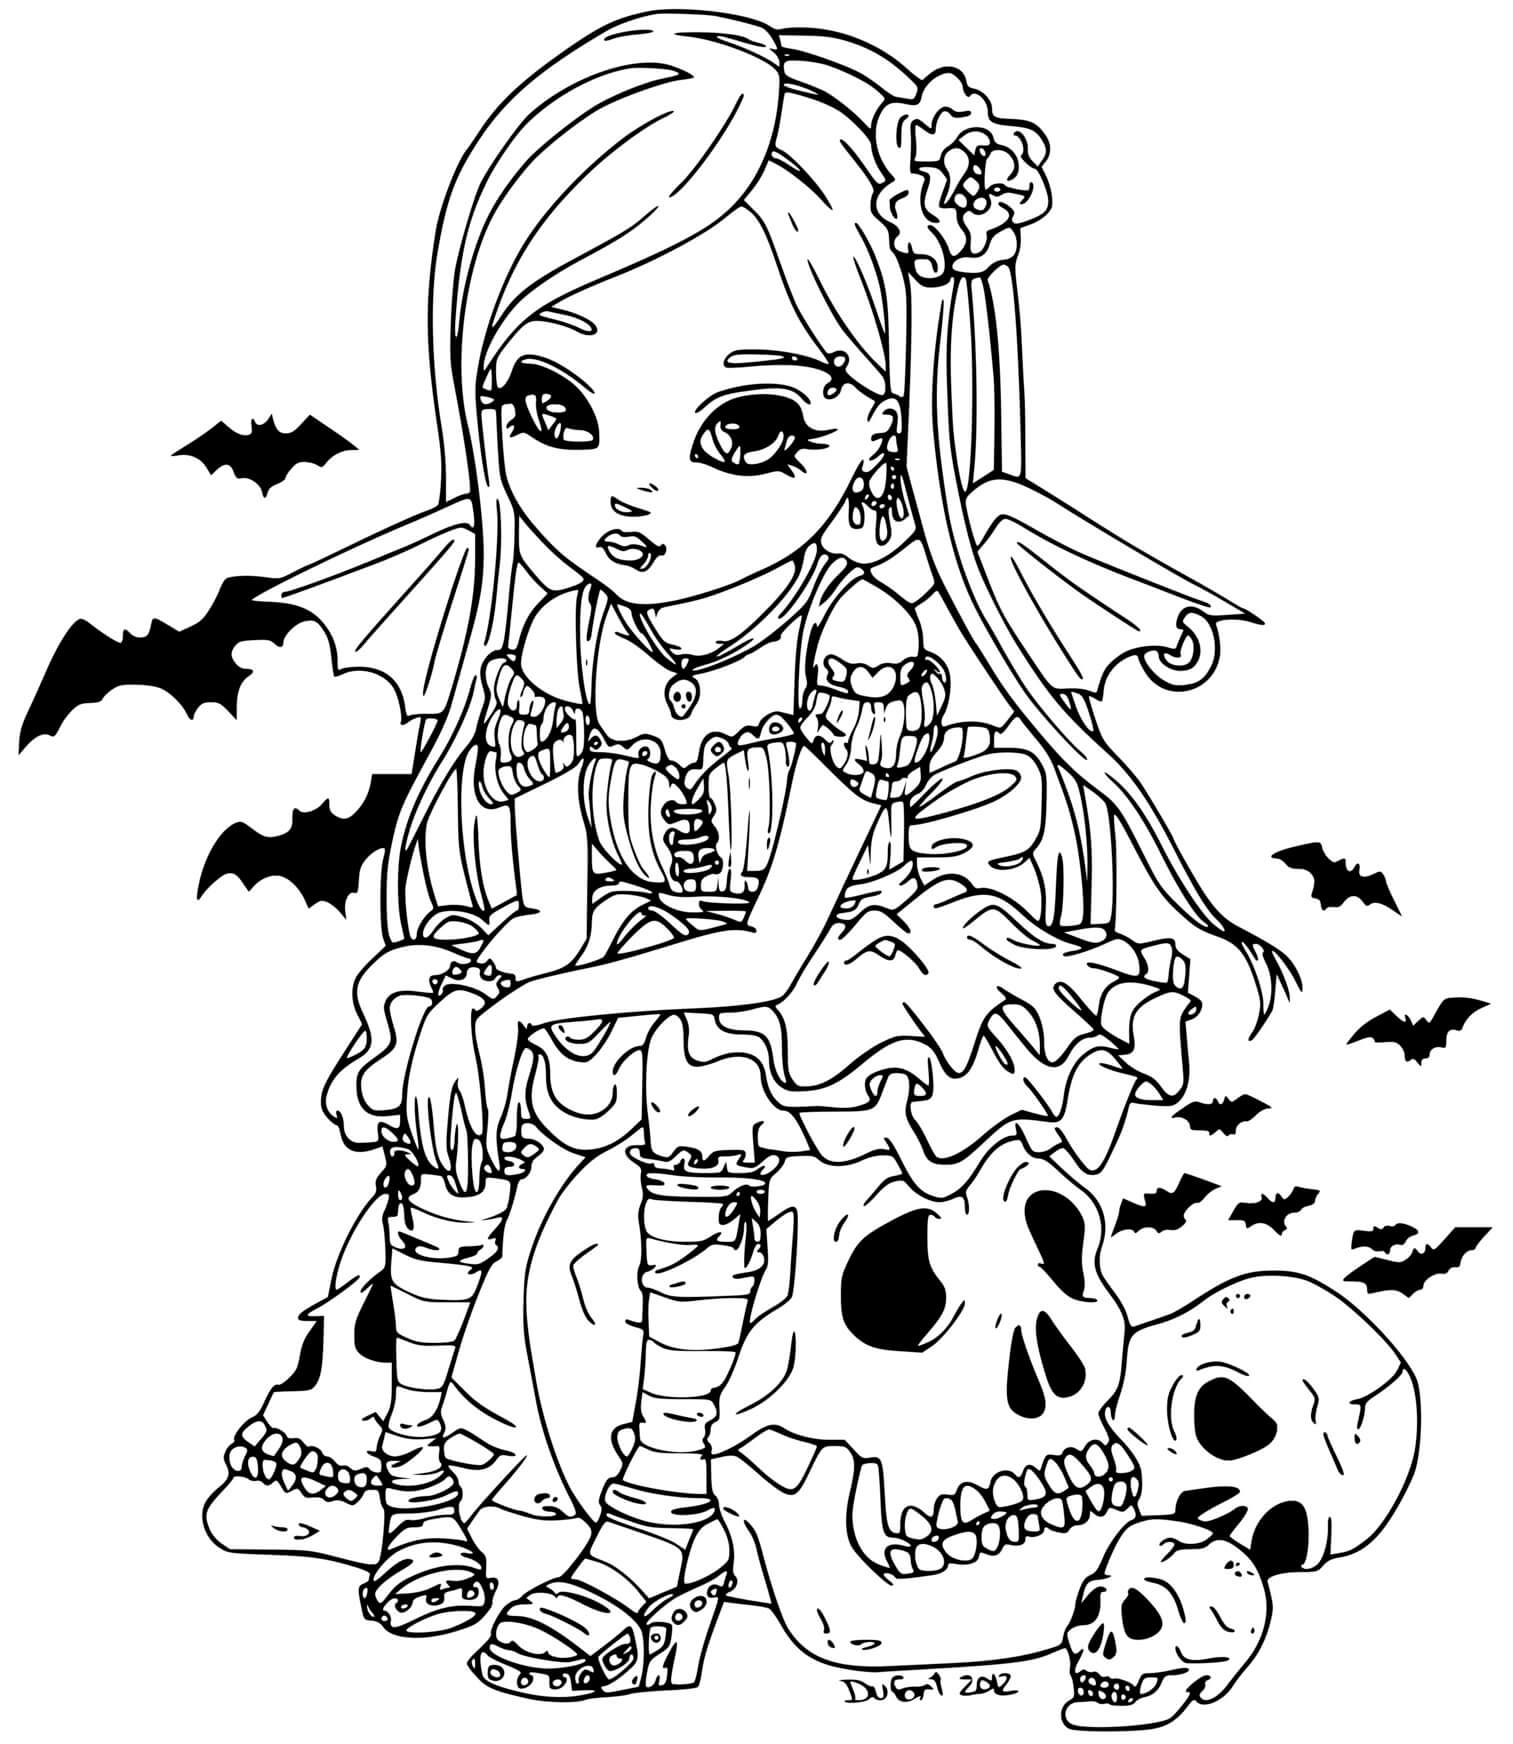 Bimbo Vampire Ghost Bats Halloween Coloring Pages - Coloring Cool